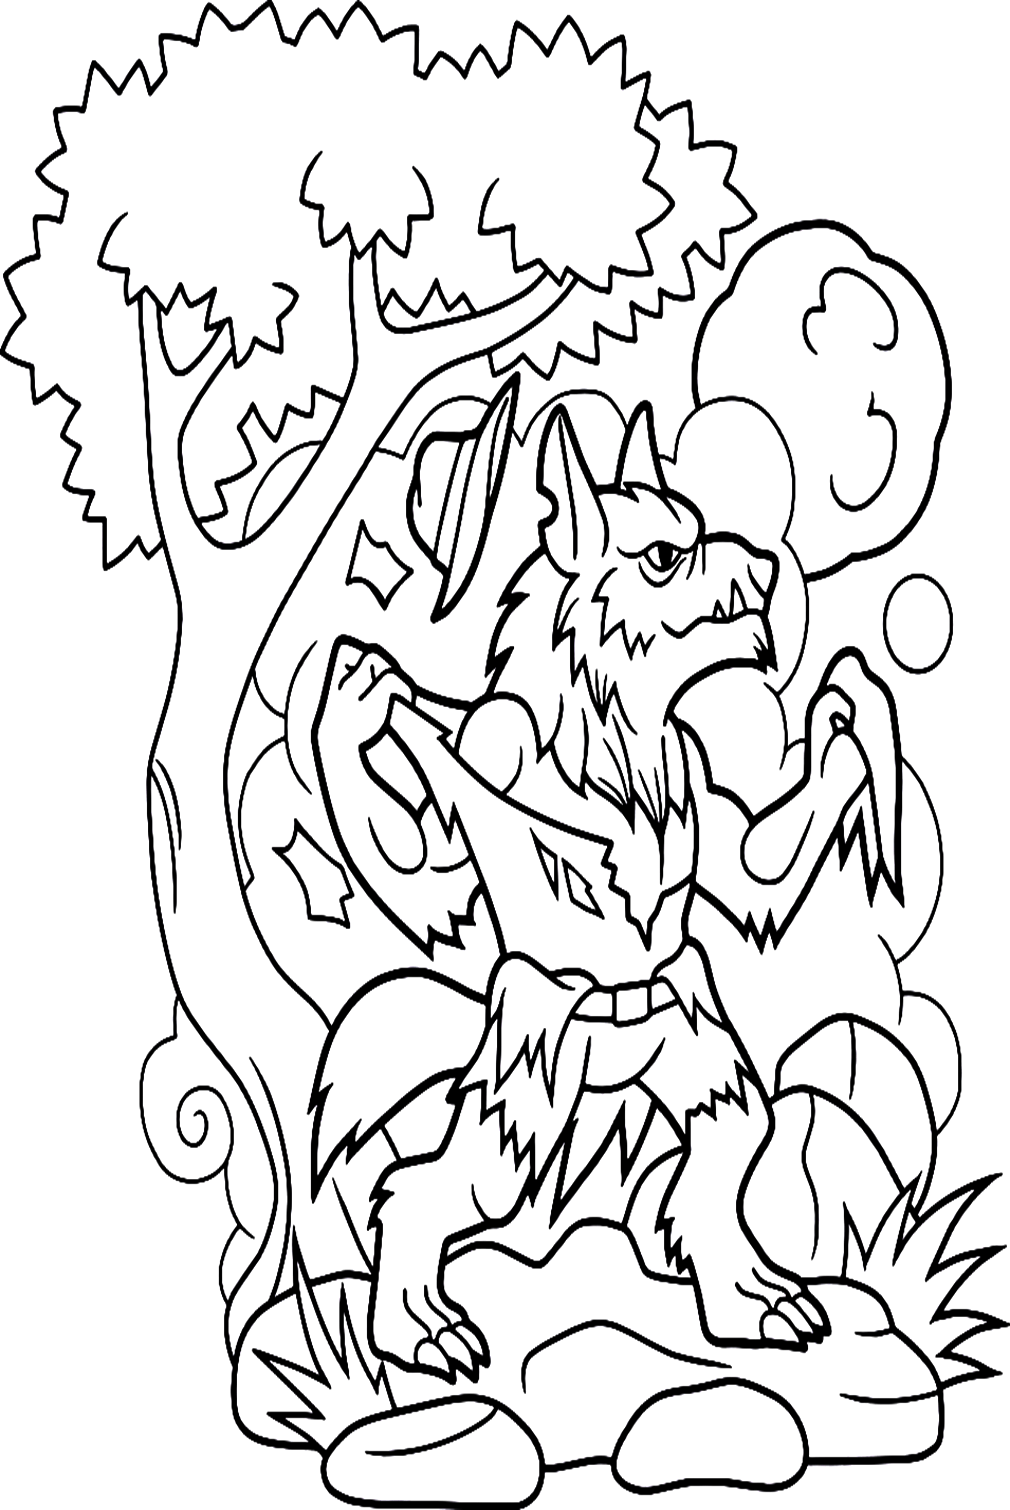 Werewolf Coloring Pages Printable